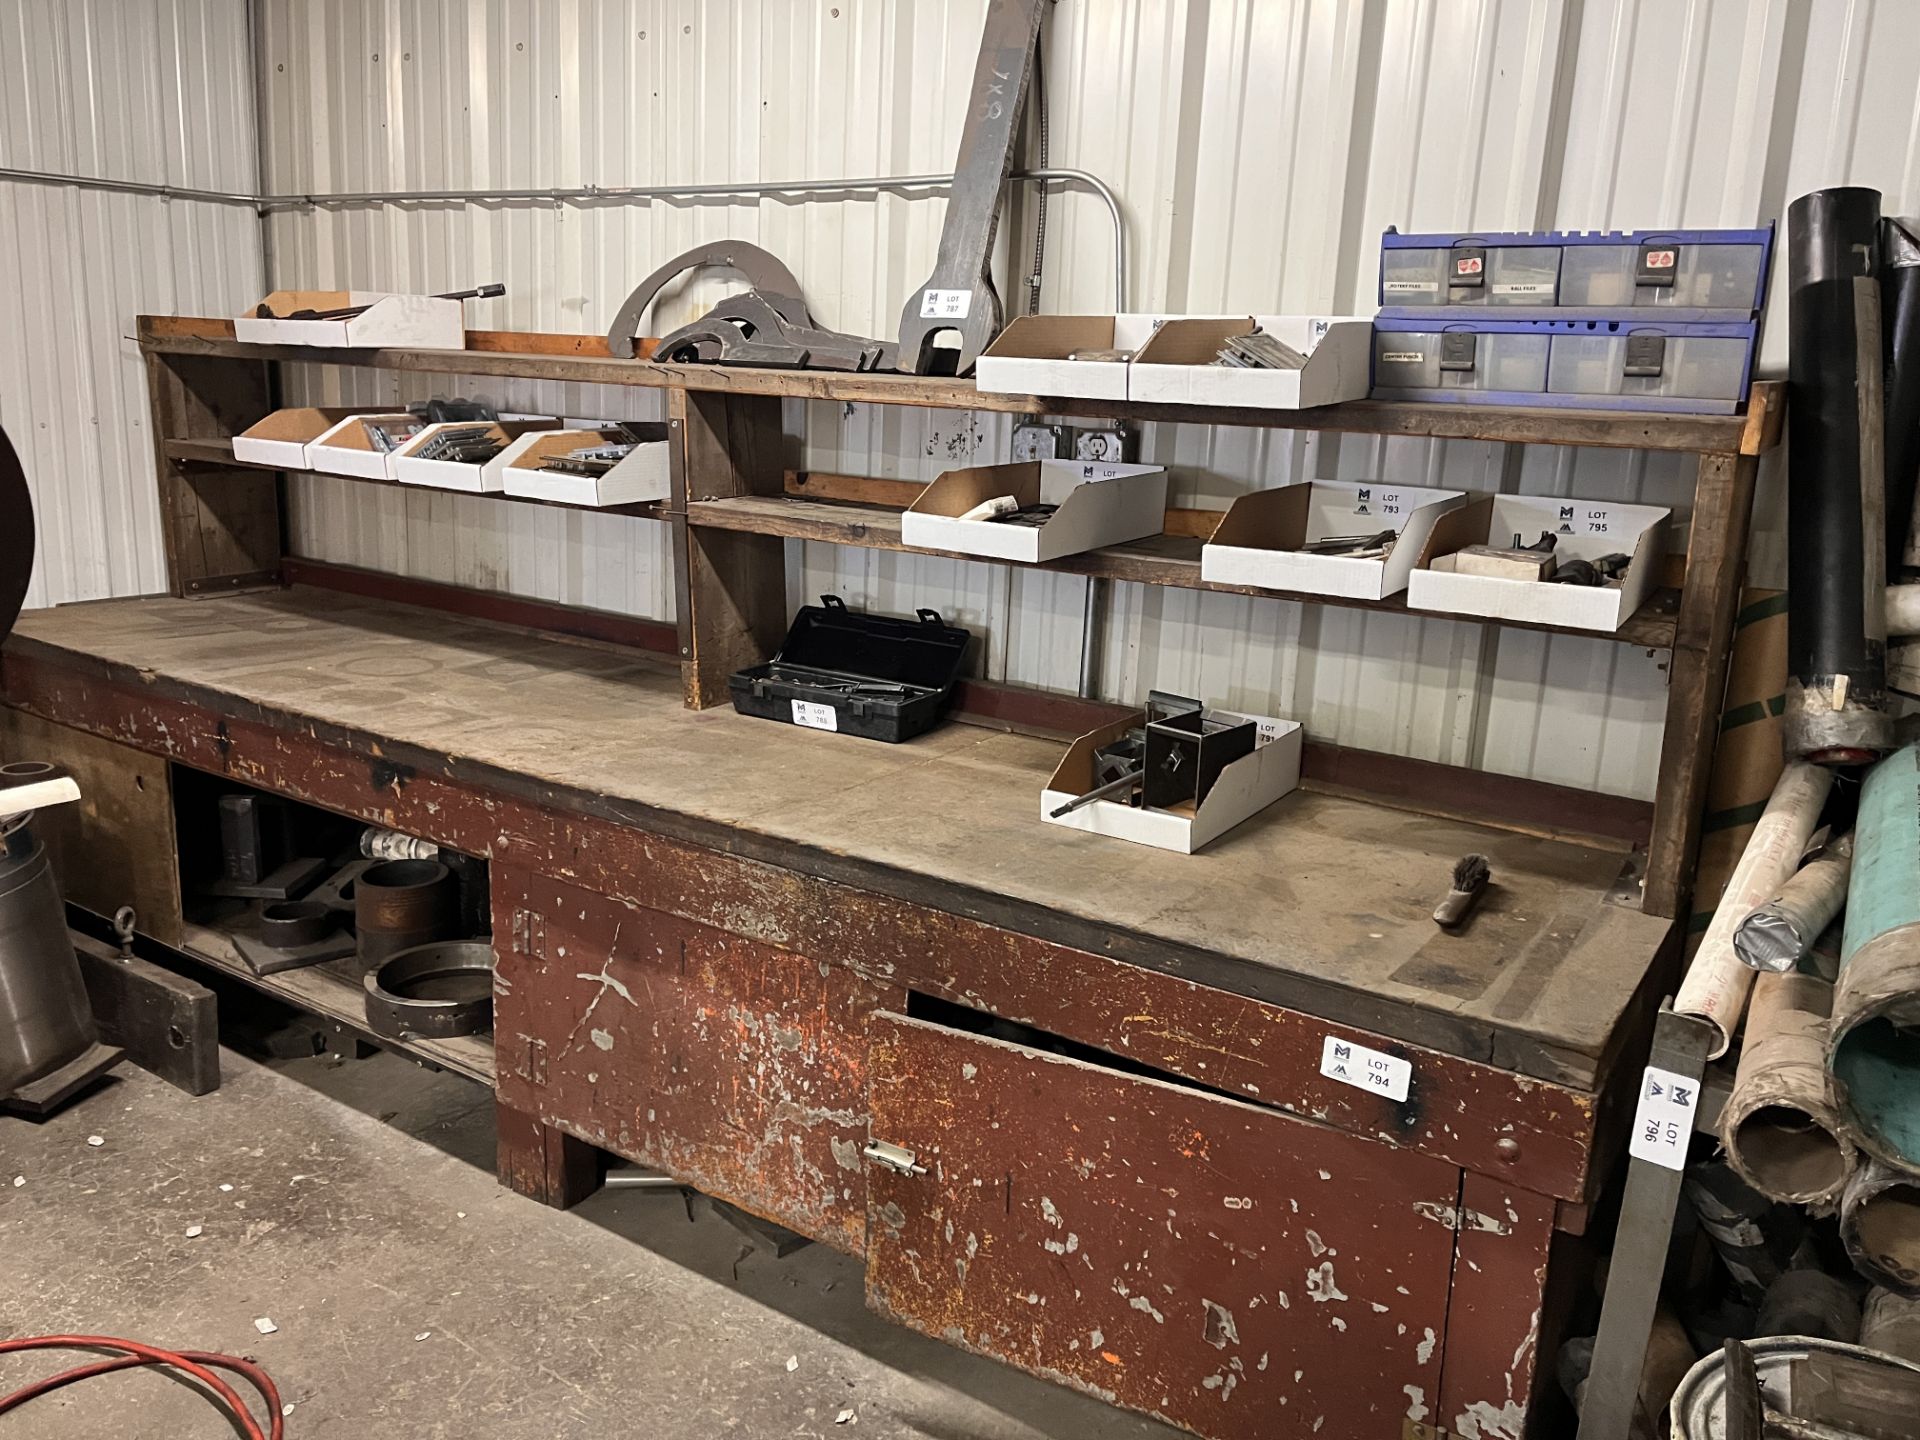 Work Bench with Scrap Metal